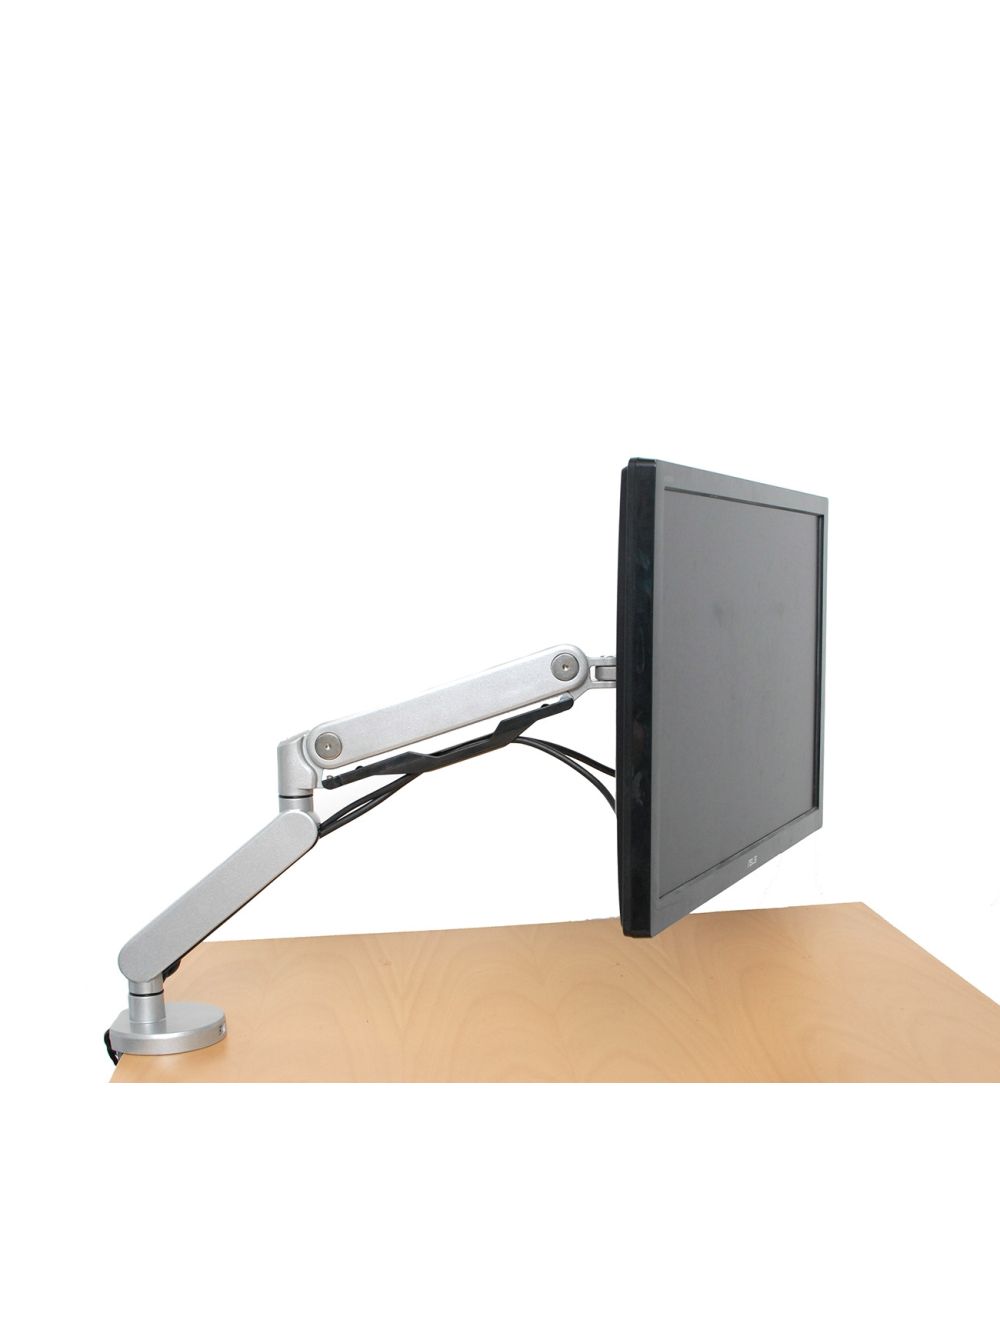 Screen Holder Monitor Arm with USB